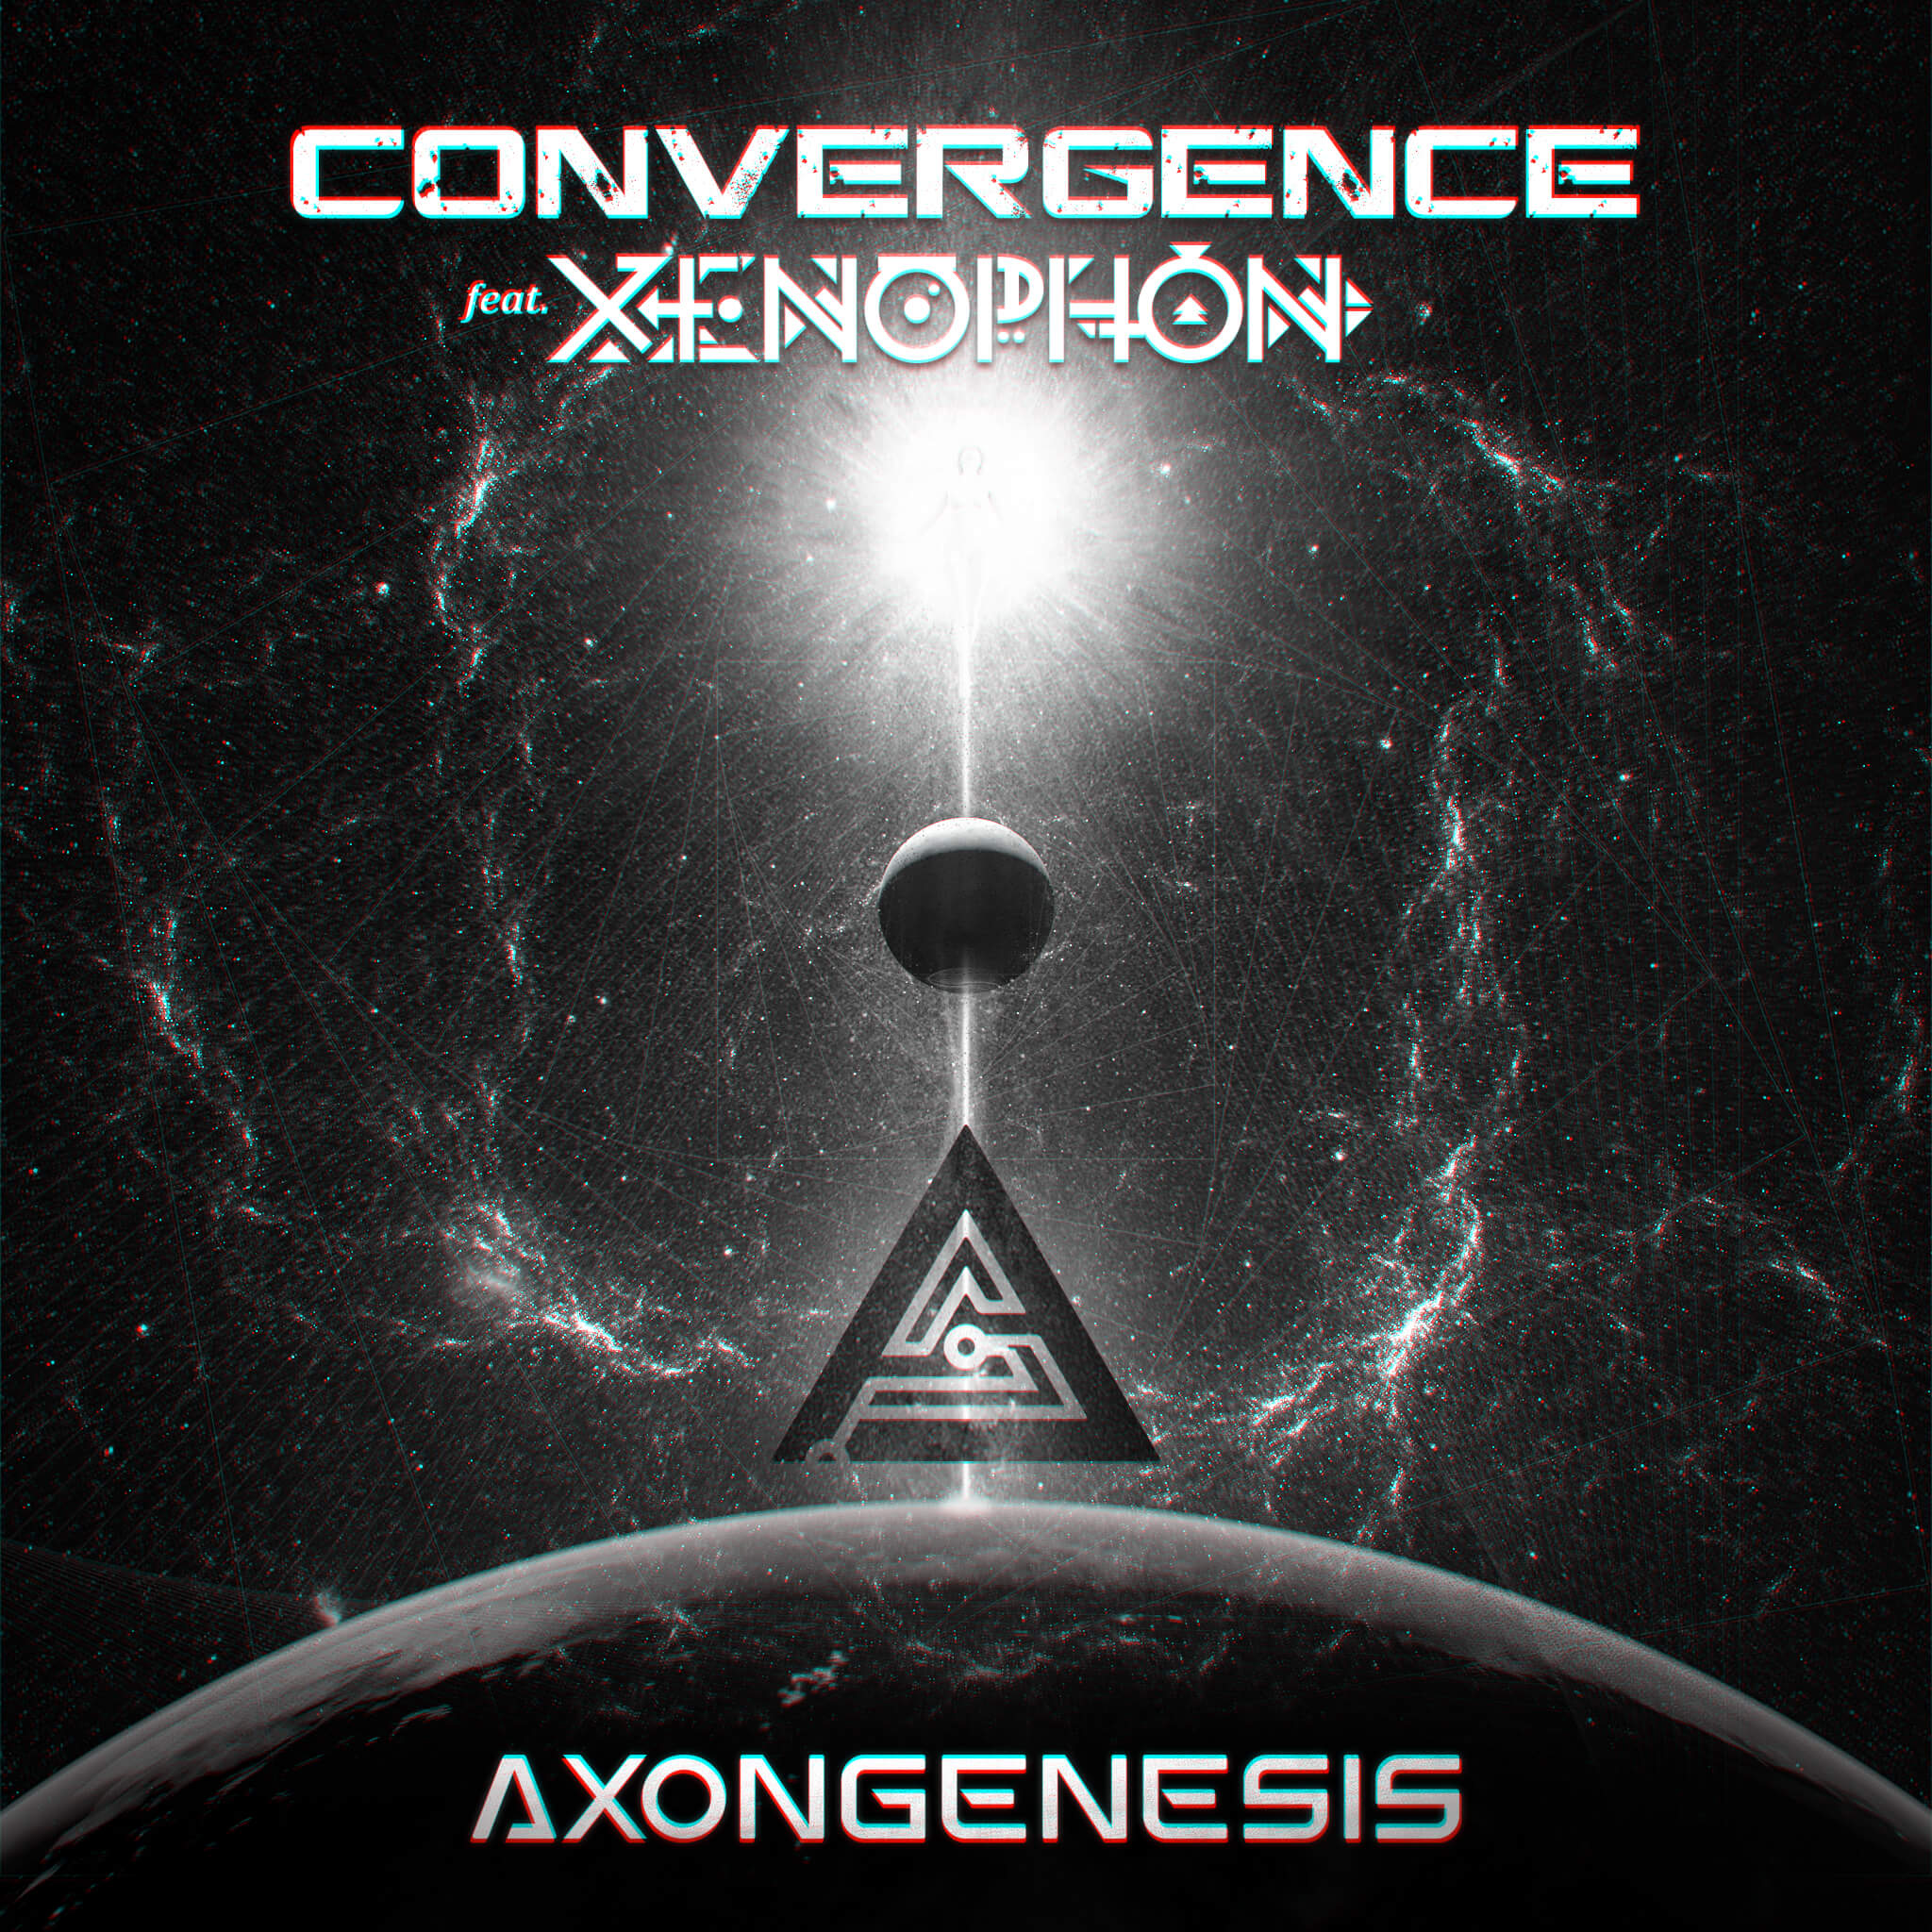 Convergence Music and Cover Art by Axon Genesis